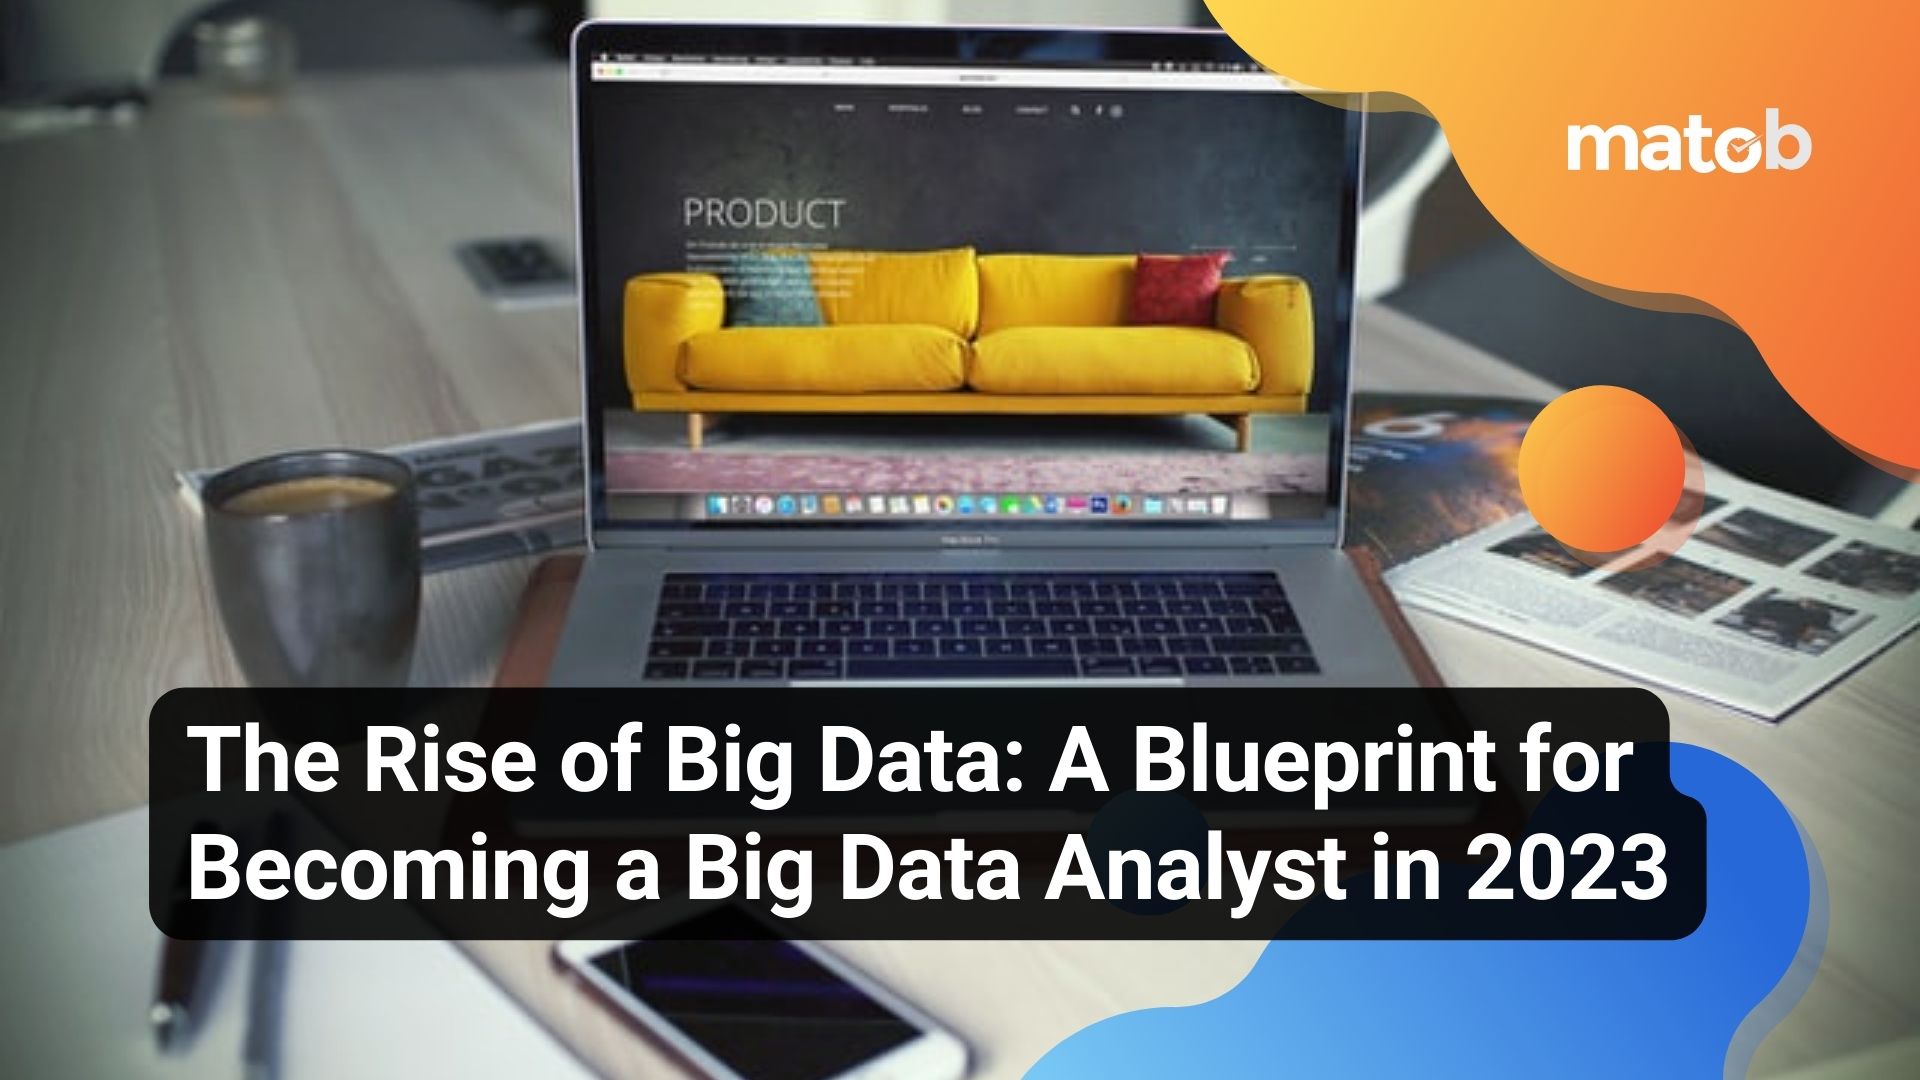 The Rise of Big Data: A Blueprint for Becoming a Big Data Analyst in 2023